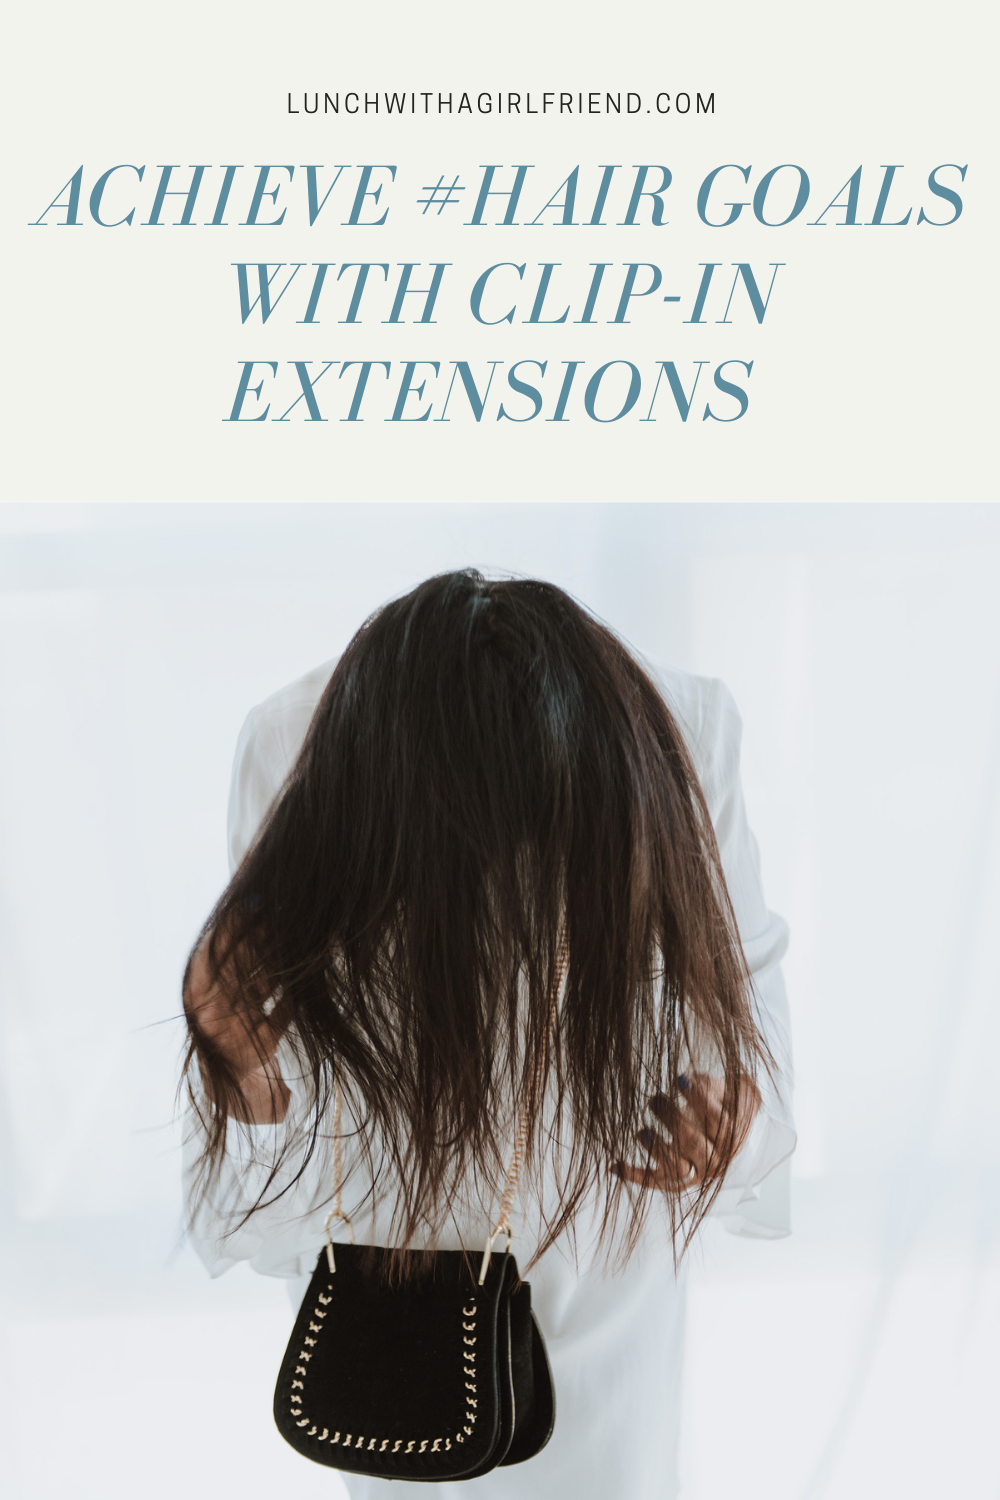 How To Achieve 2020 #HairGoals With Clip-In Hair Extensions